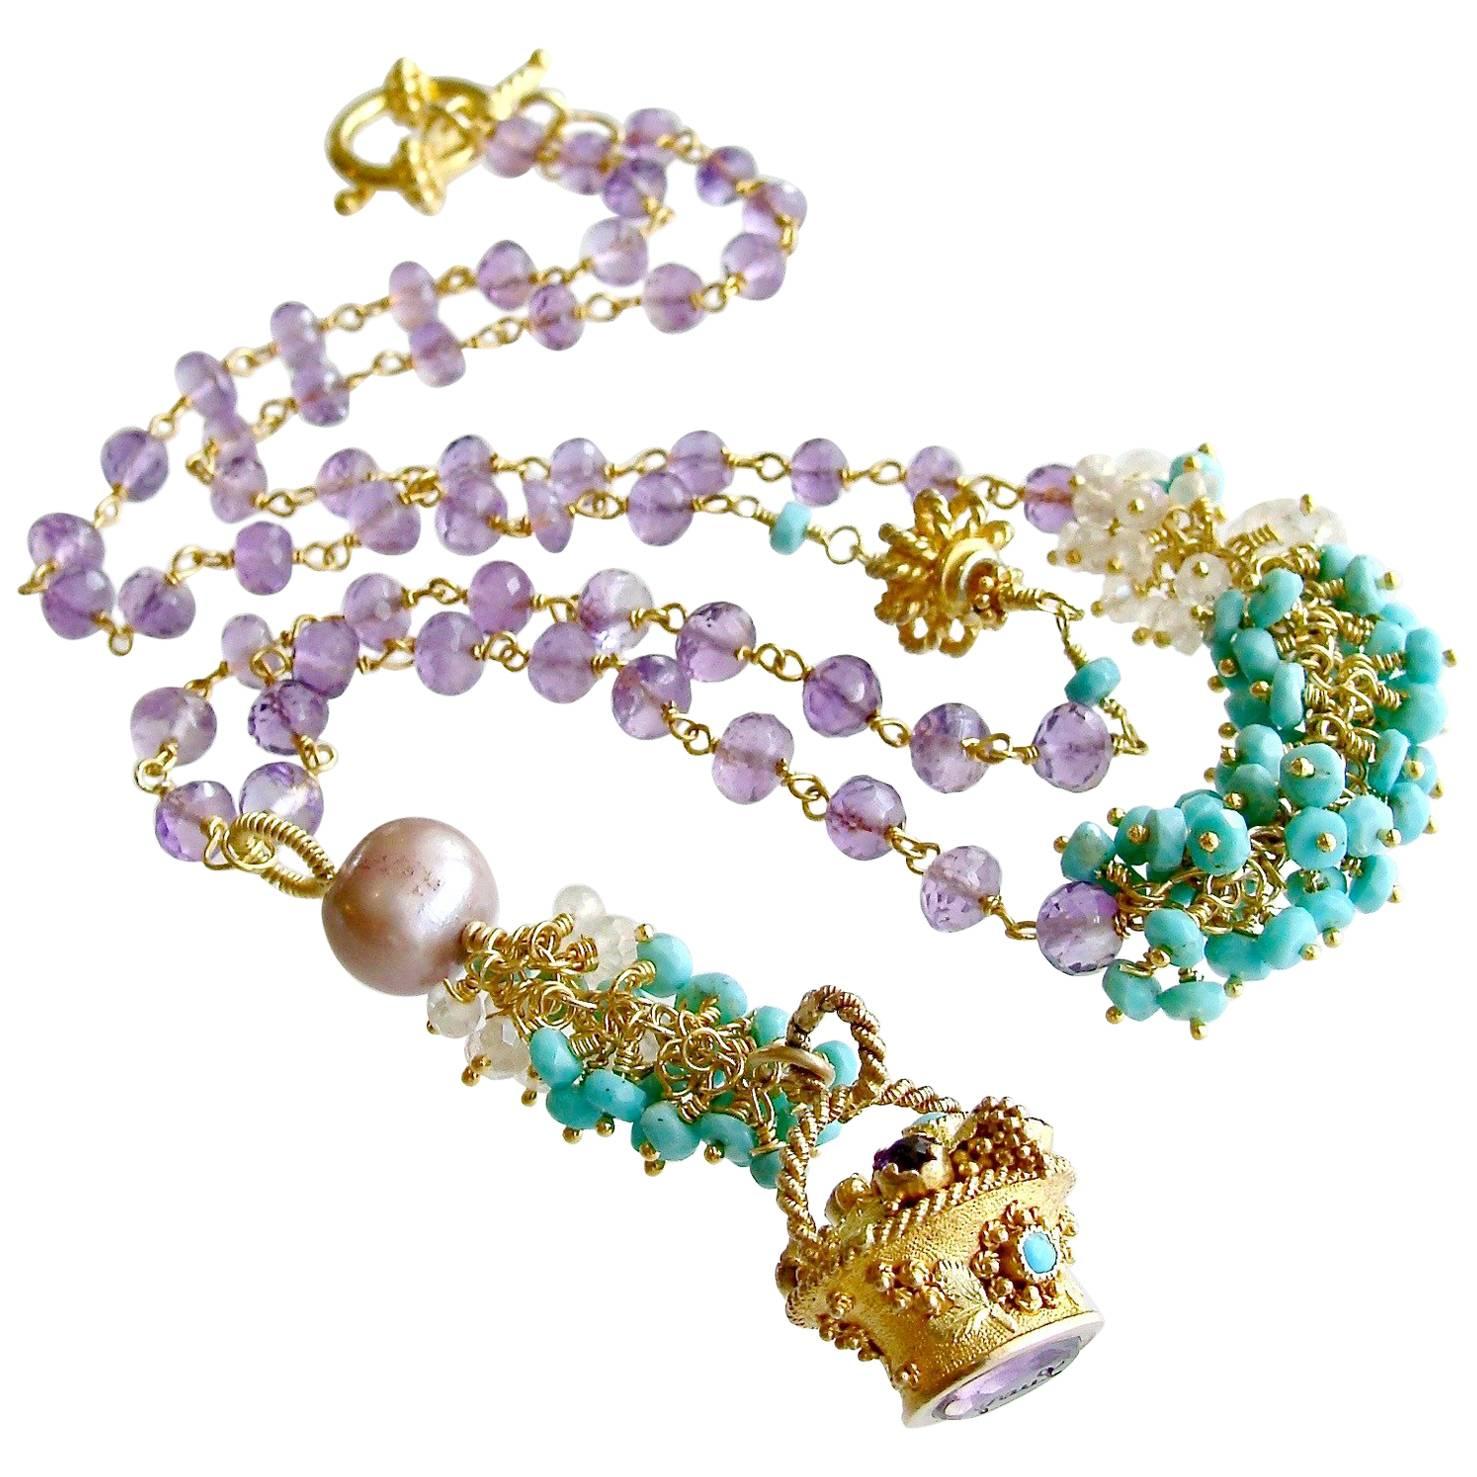 Lucy Fob Sleeping Beauty Turquoise Amethyst Mystic Moonstone Necklace